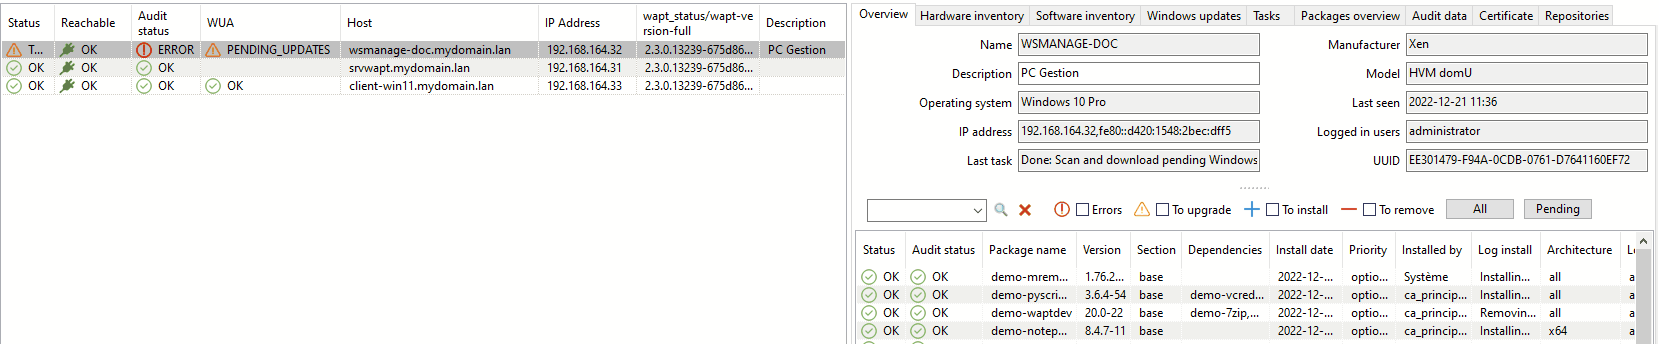 Adding a normalized software title name to the software inventory for the selected hosts